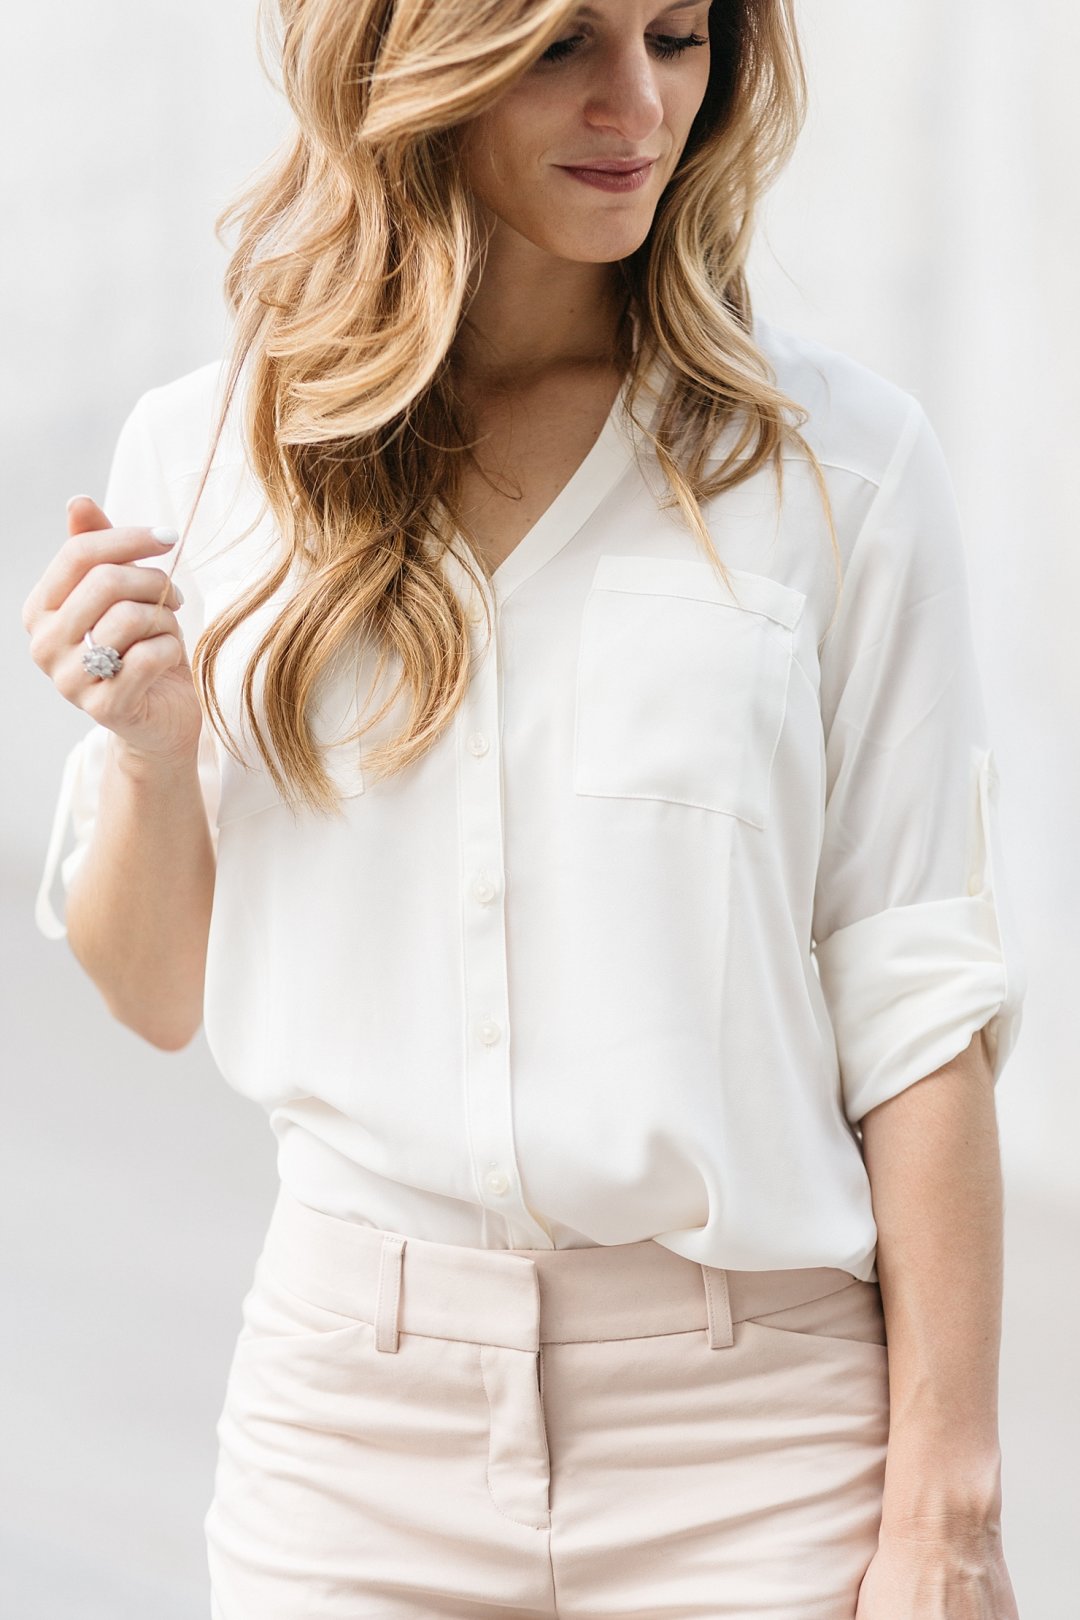 business casual outfit, express editor barely bootcut pants, blush pink pants with off white blouse